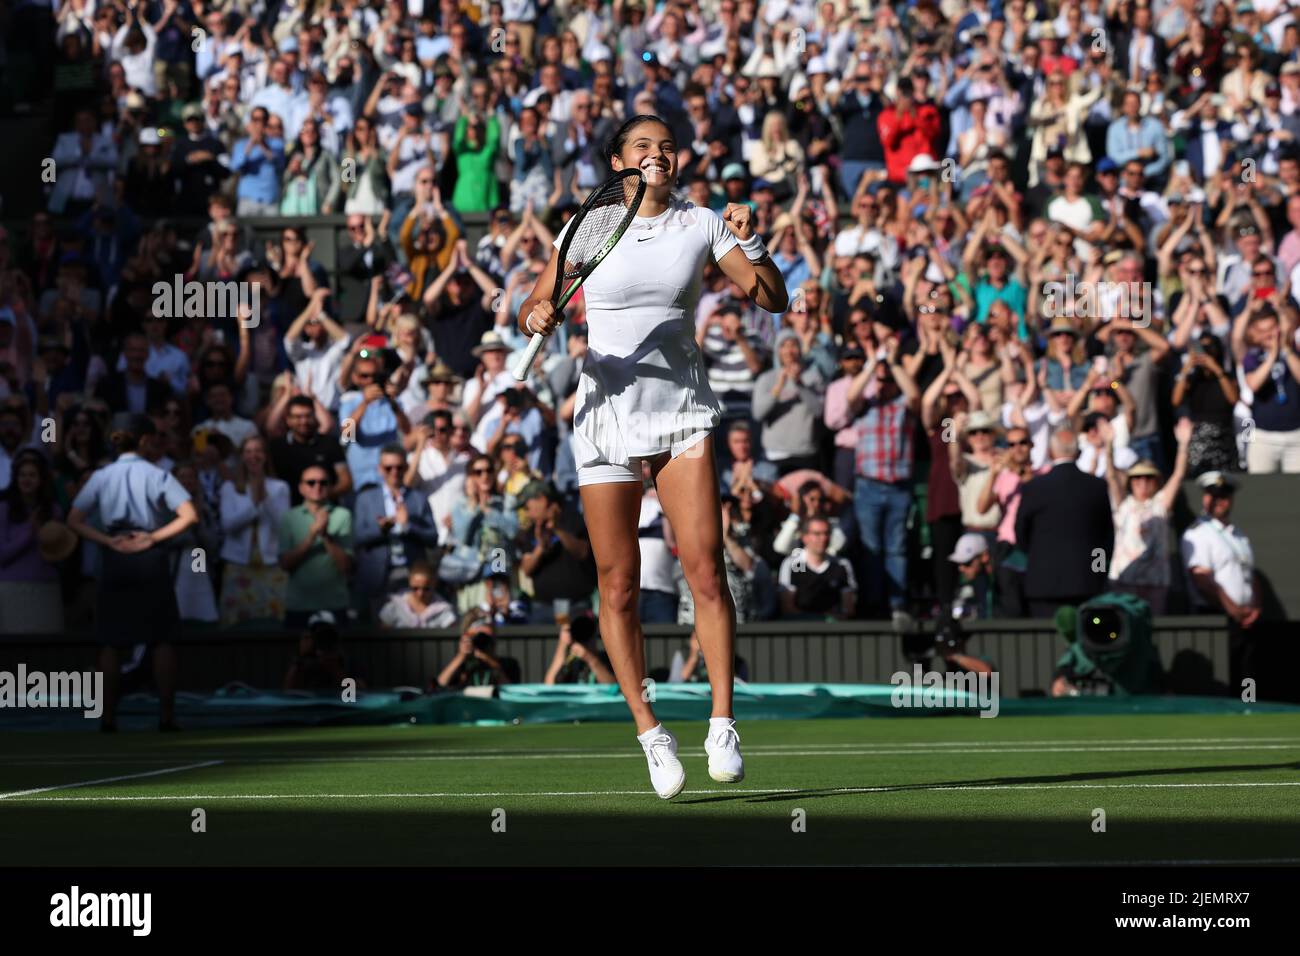 Wimbledon, UK, 27th June 2022, All England Lawn Tennis and Croquet Club, London, England; Wimbledon Tennis tournament; Emma Raducanu jumps for joy after she wins the match 2 sets to 0 against